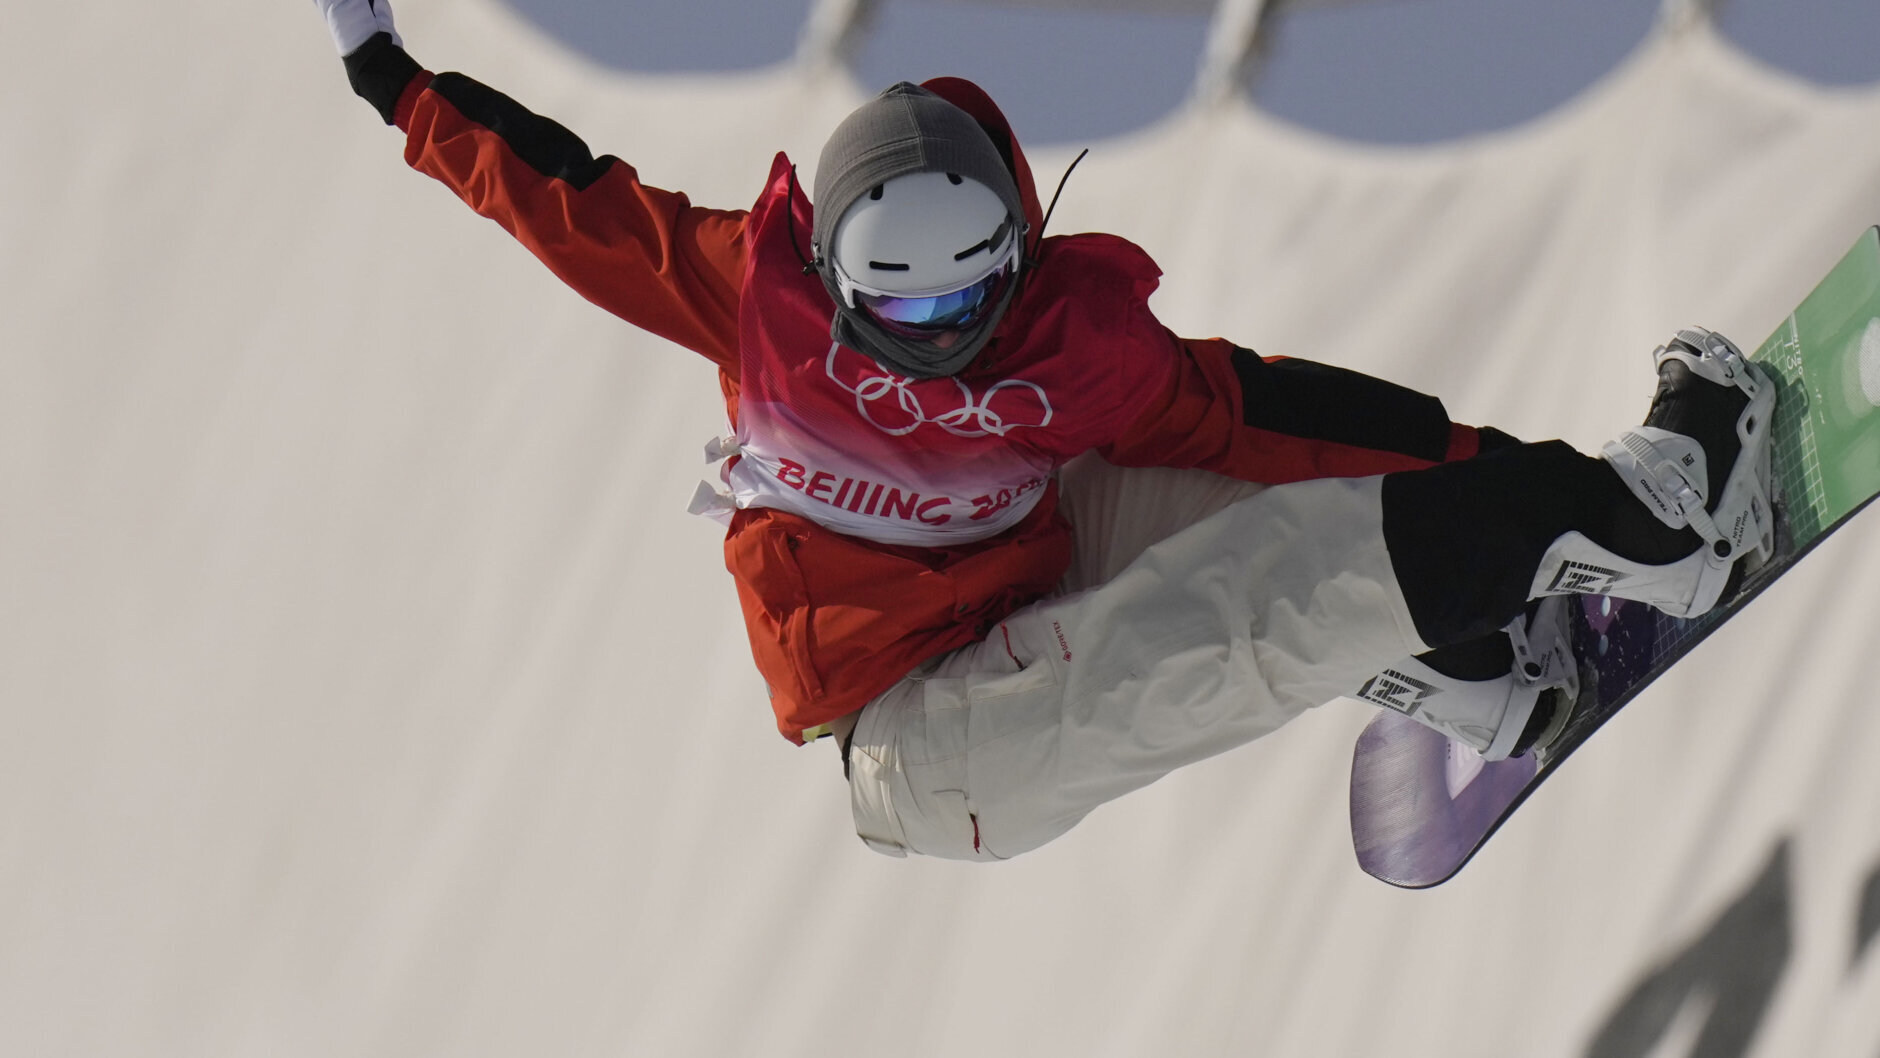 <p>Germany&#8217;s Andre Hoeflich competes during the men&#8217;s halfpipe finals at the 2022 Winter Olympics, Friday, Feb. 11, 2022, in Zhangjiakou, China.</p>
